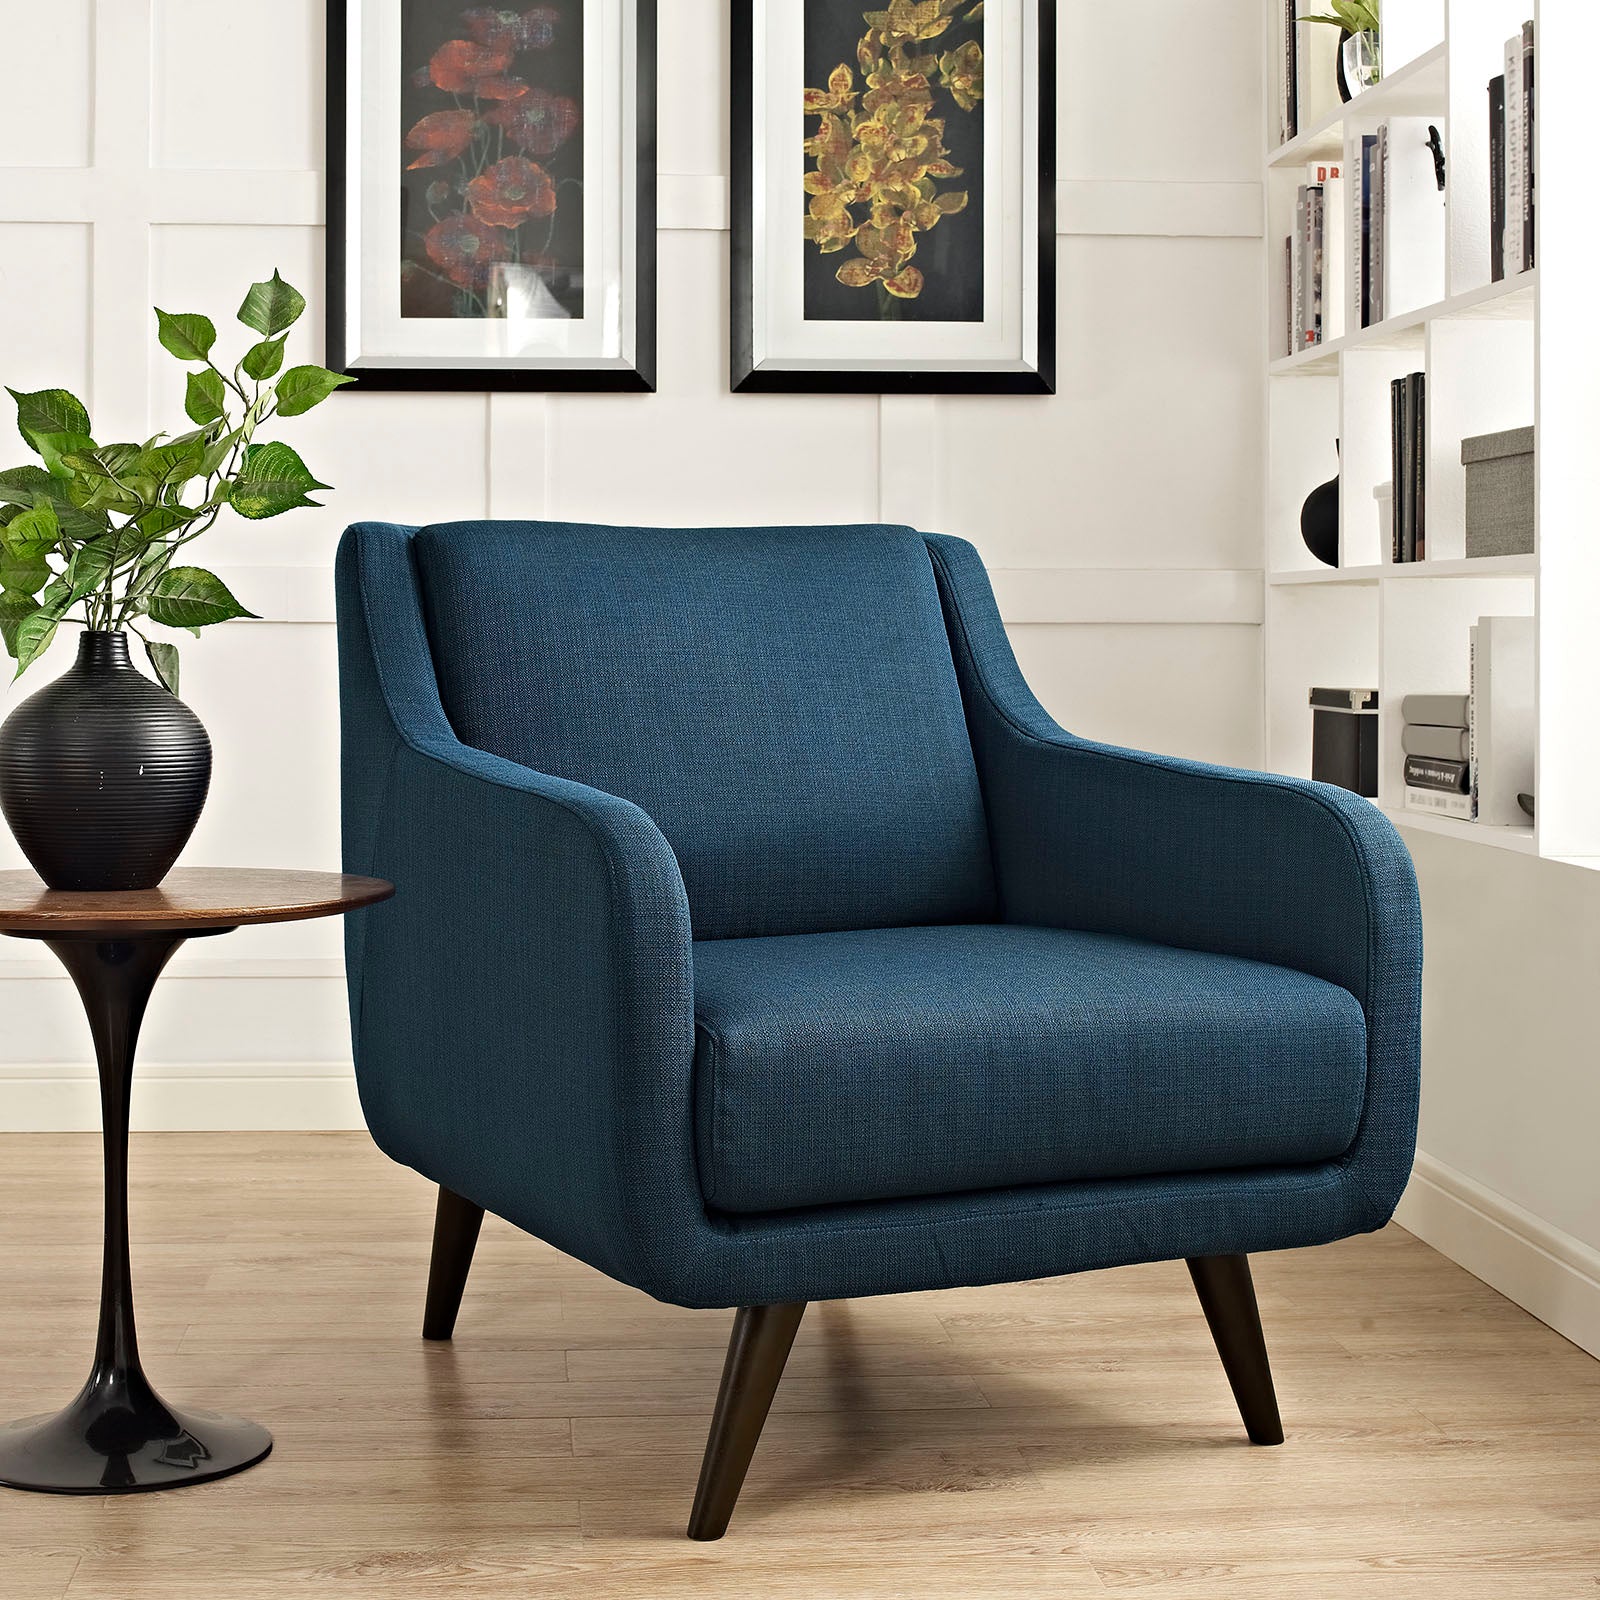 Verve Upholstered Fabric Armchair - East Shore Modern Home Furnishings